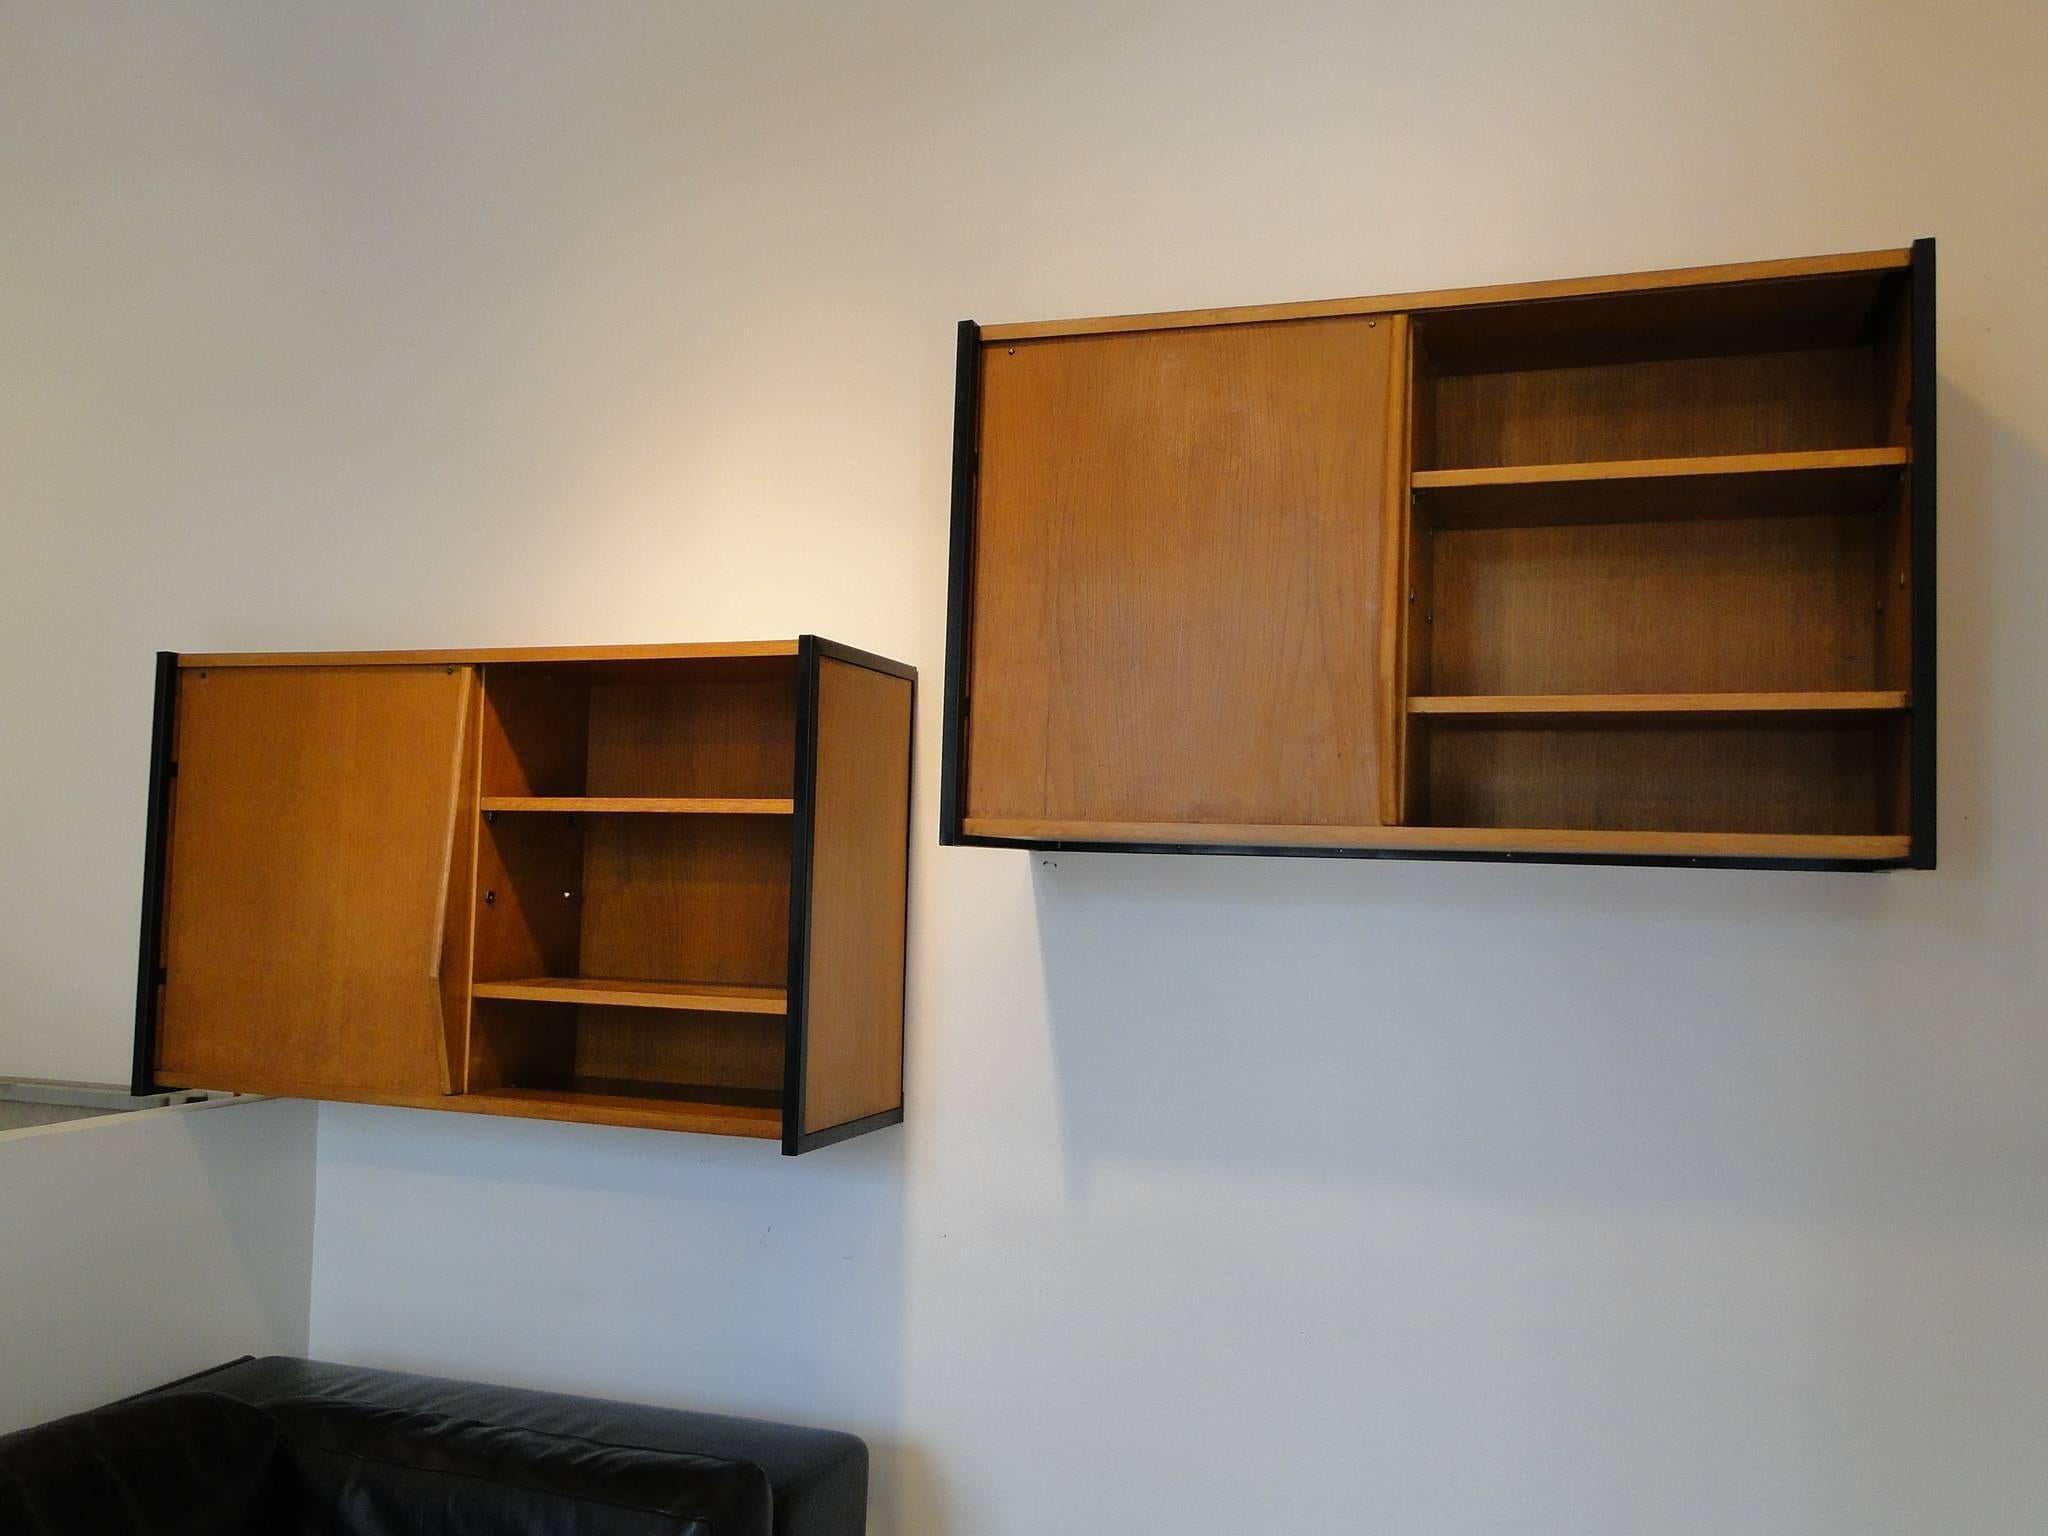 Available at the unit


Stunning wall-mounted Pair cabinets attributed to Charlotte Perriand, manufactured in France, circa 1950.

This beautiful pieces is made of the highest quality oakwood with black metal framing on the sides, giving it a